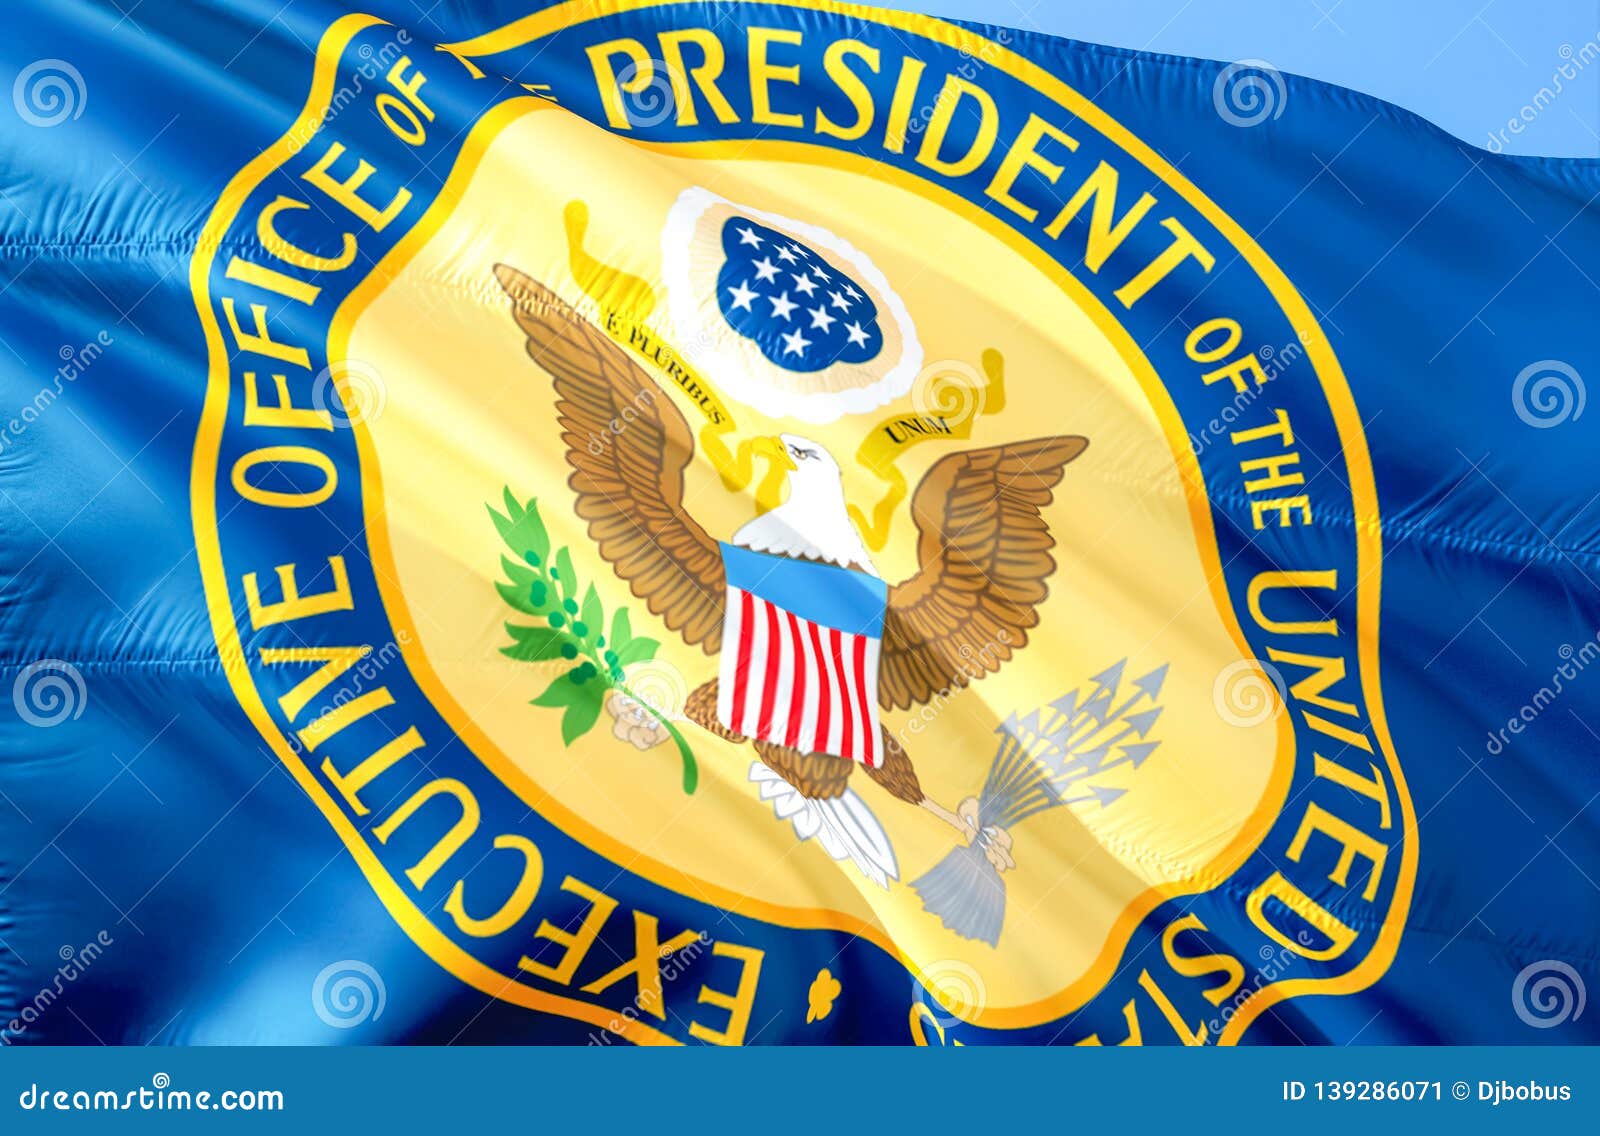 Executive Office President Of The United States Flag 3d Waving Flag Design The National Symbol Of Usa 3d Rendering President Stock Image Image Of View Background